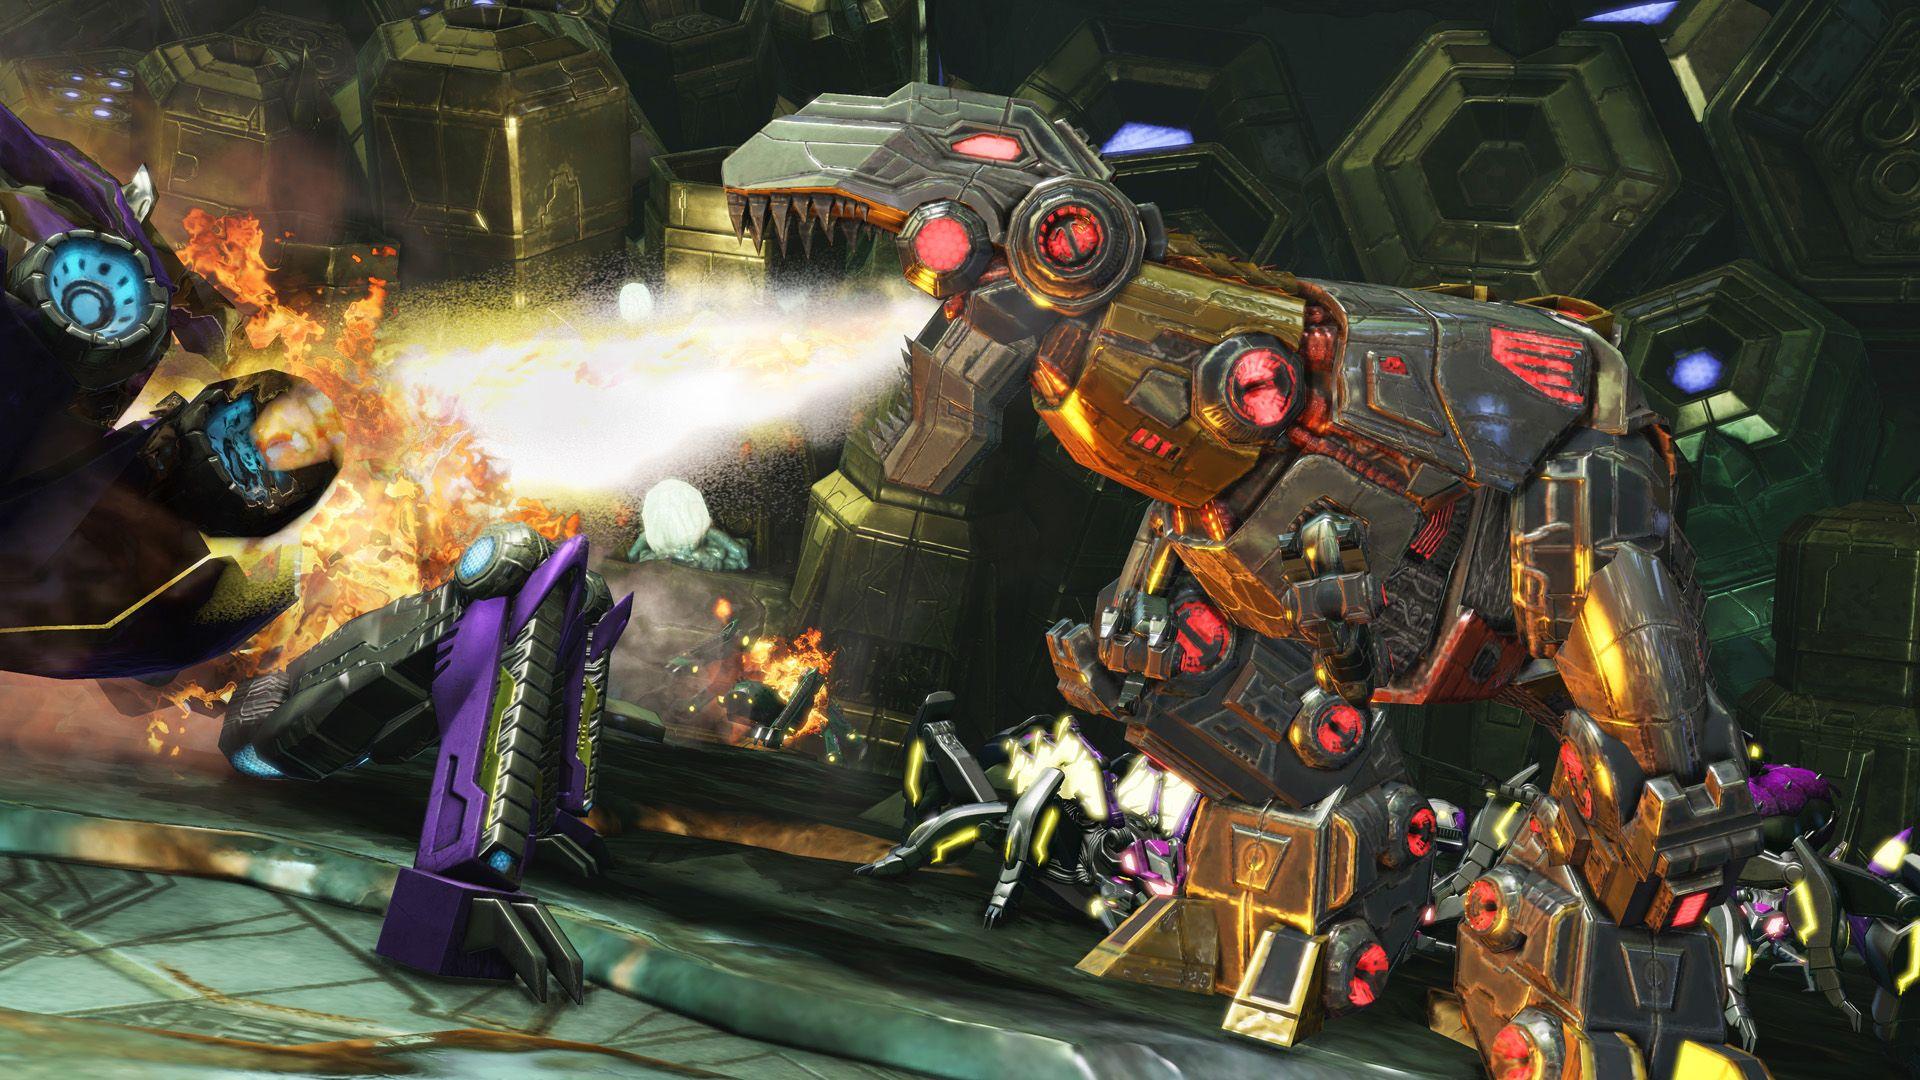 E3 2012 Hands On: Transformers: Fall Of Cybertron Brings Bigger